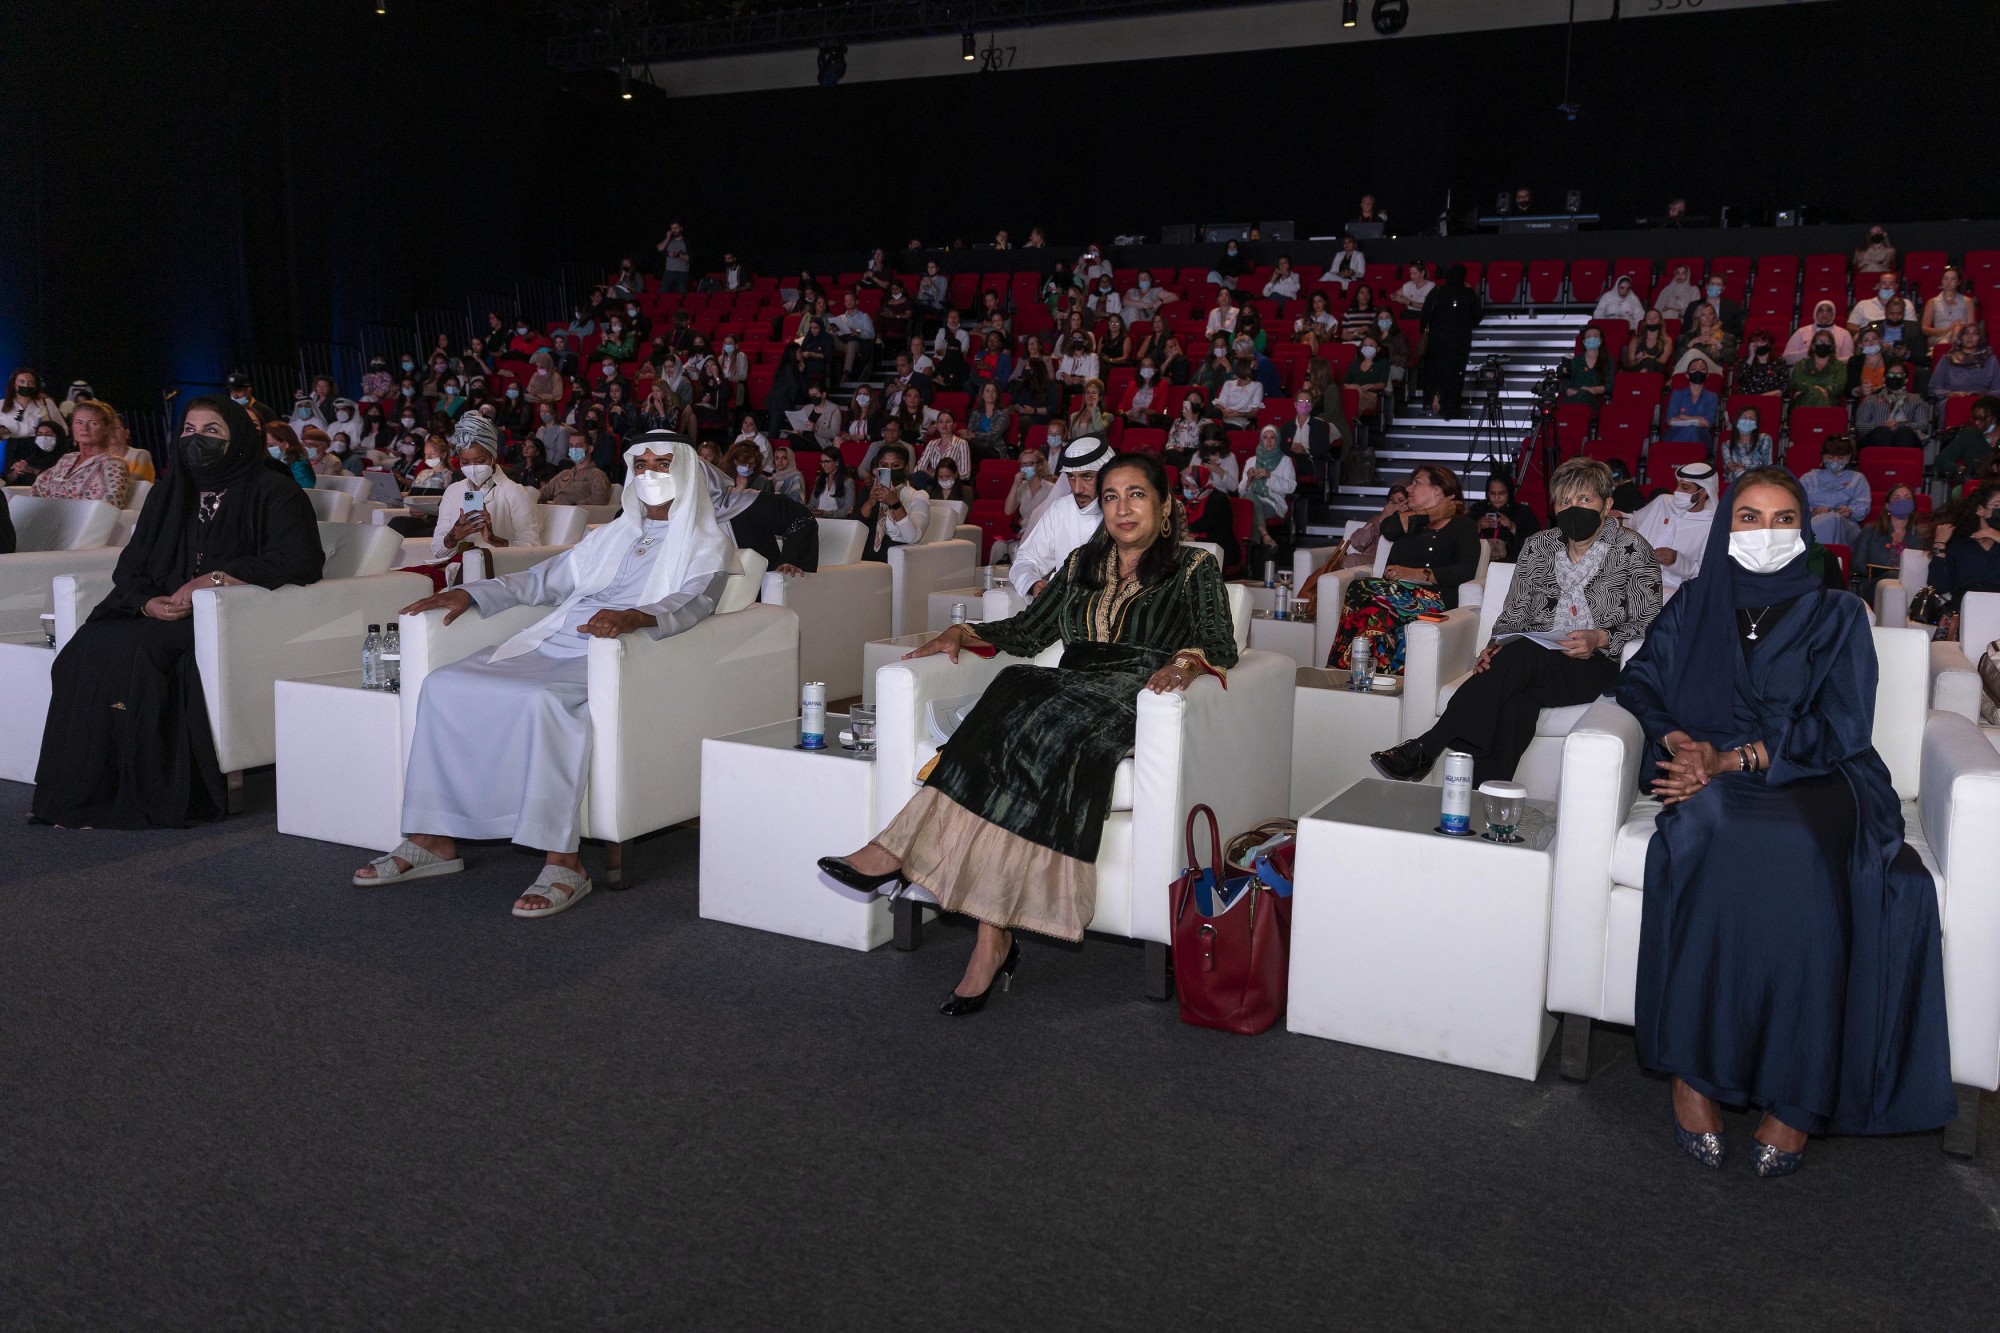 His Excellency Sheikh Nahayan Mabarak Al Nahayan (L2), UAE Minister of Tolerance and Coexistence Commissioner General of Expo 2020 Dubai and Anita Bhatiam (R2), Assistant Secretary General of the United Nations and Deputy Executive Director